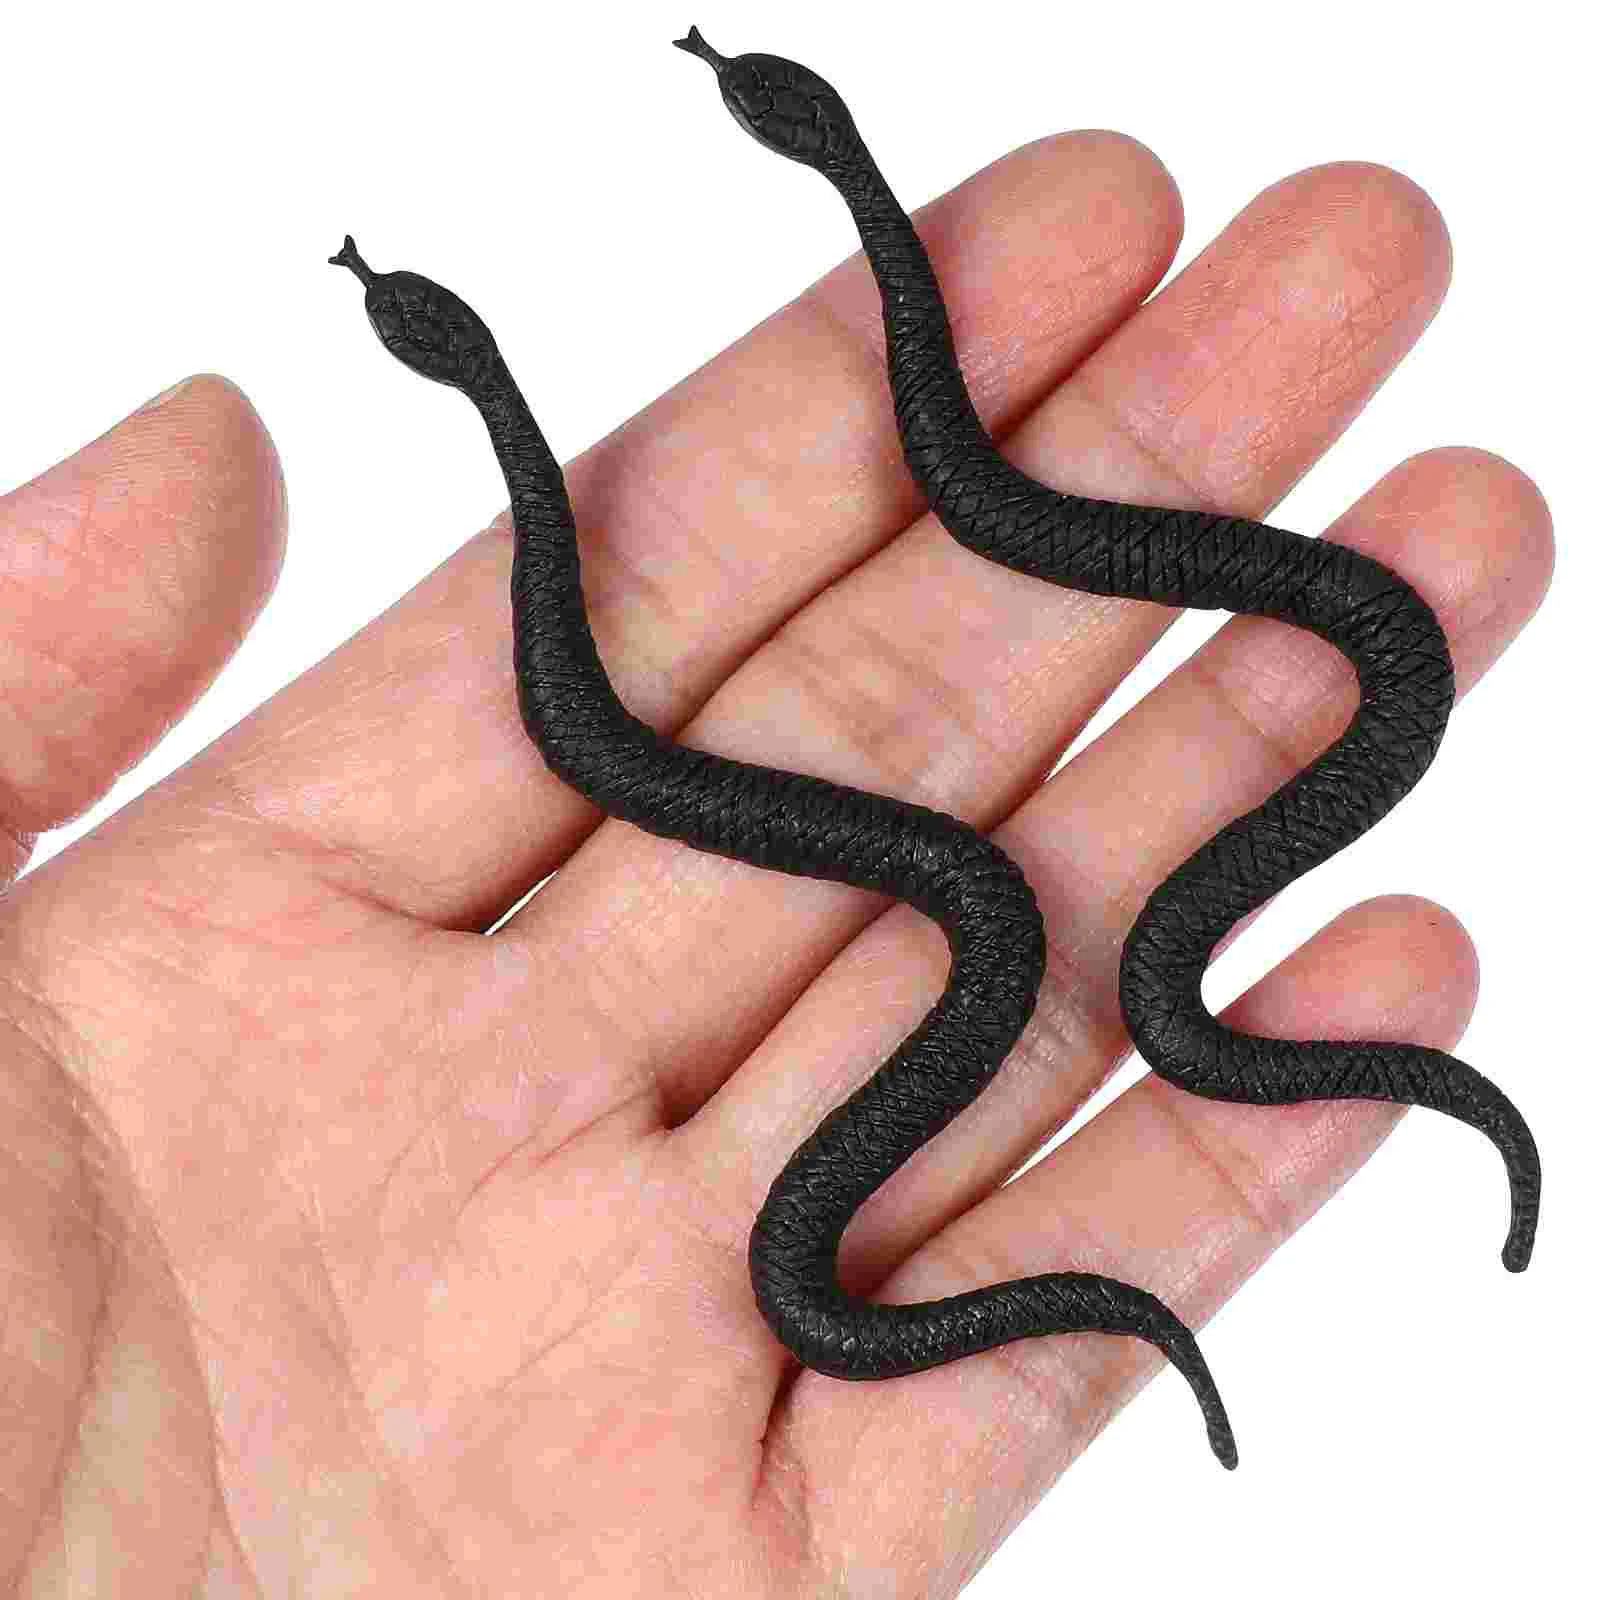 100 Pcs Simulation Snake Model Childrens Toys Faux Snakes Props Fake for Party Plastic Trick Realistic simulation plastic fake tree background wall vine photography props decorations false flower household items party supplies